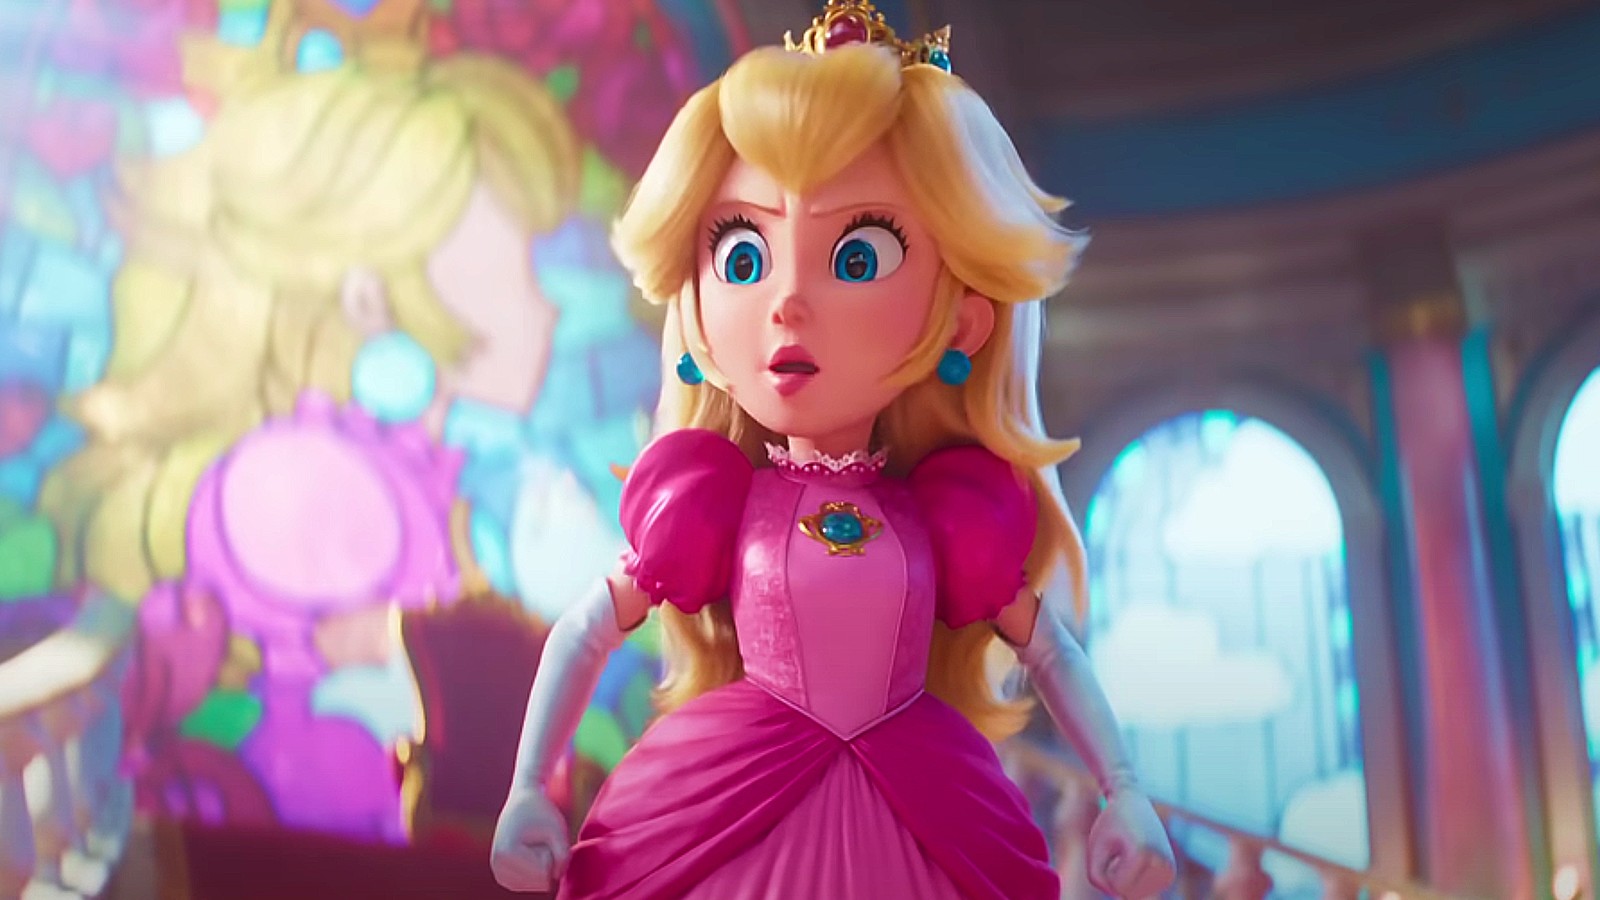 How old is Princess Peach in the Super Mario Bros movie? 